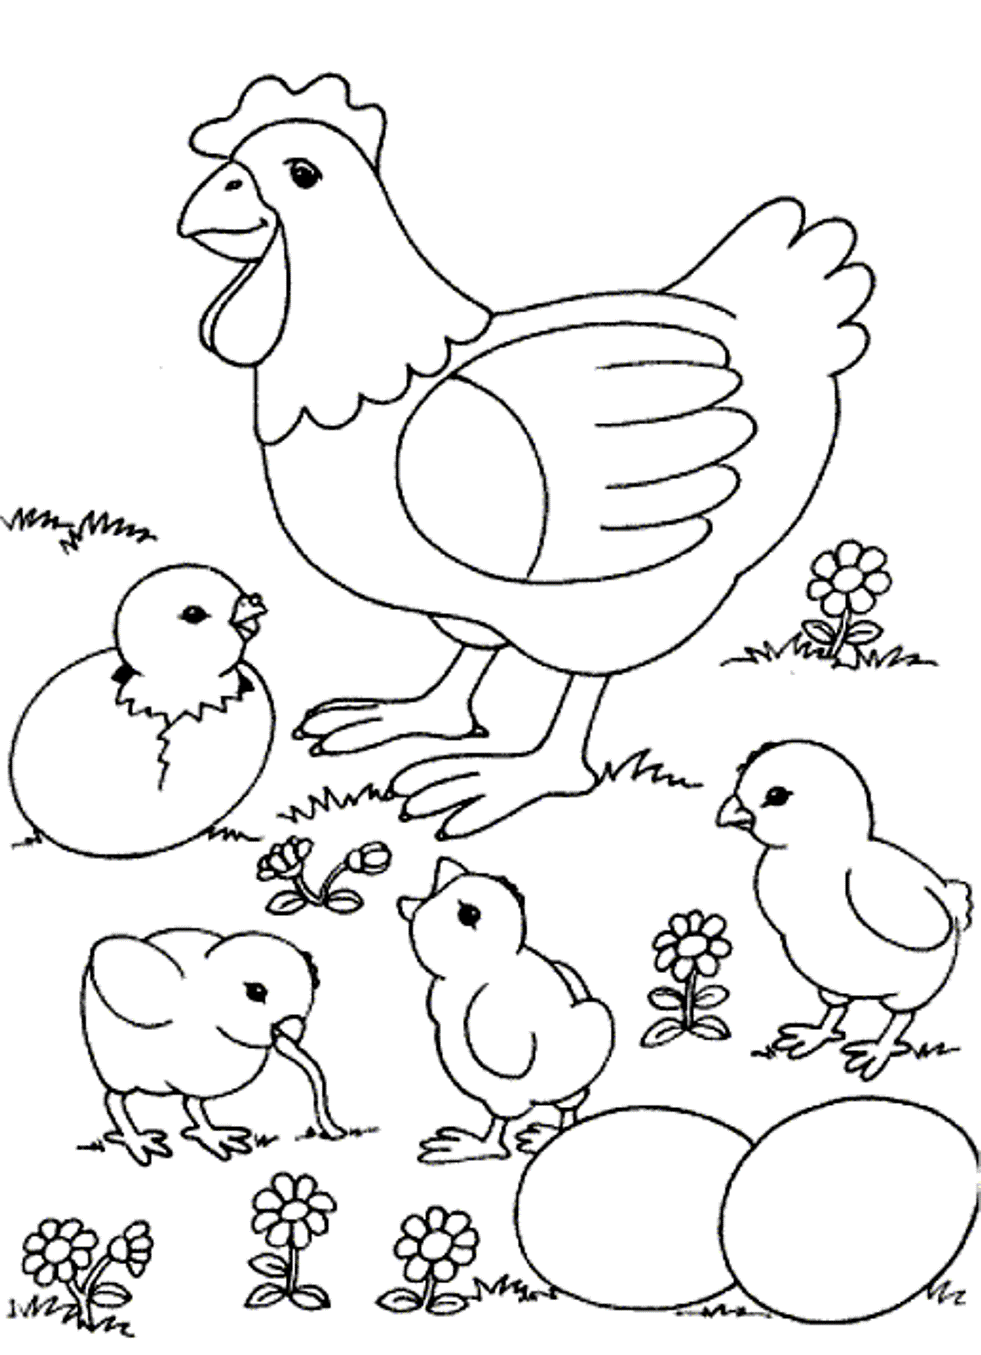 farm animal coloring pages. image detail for free farm coloring ...